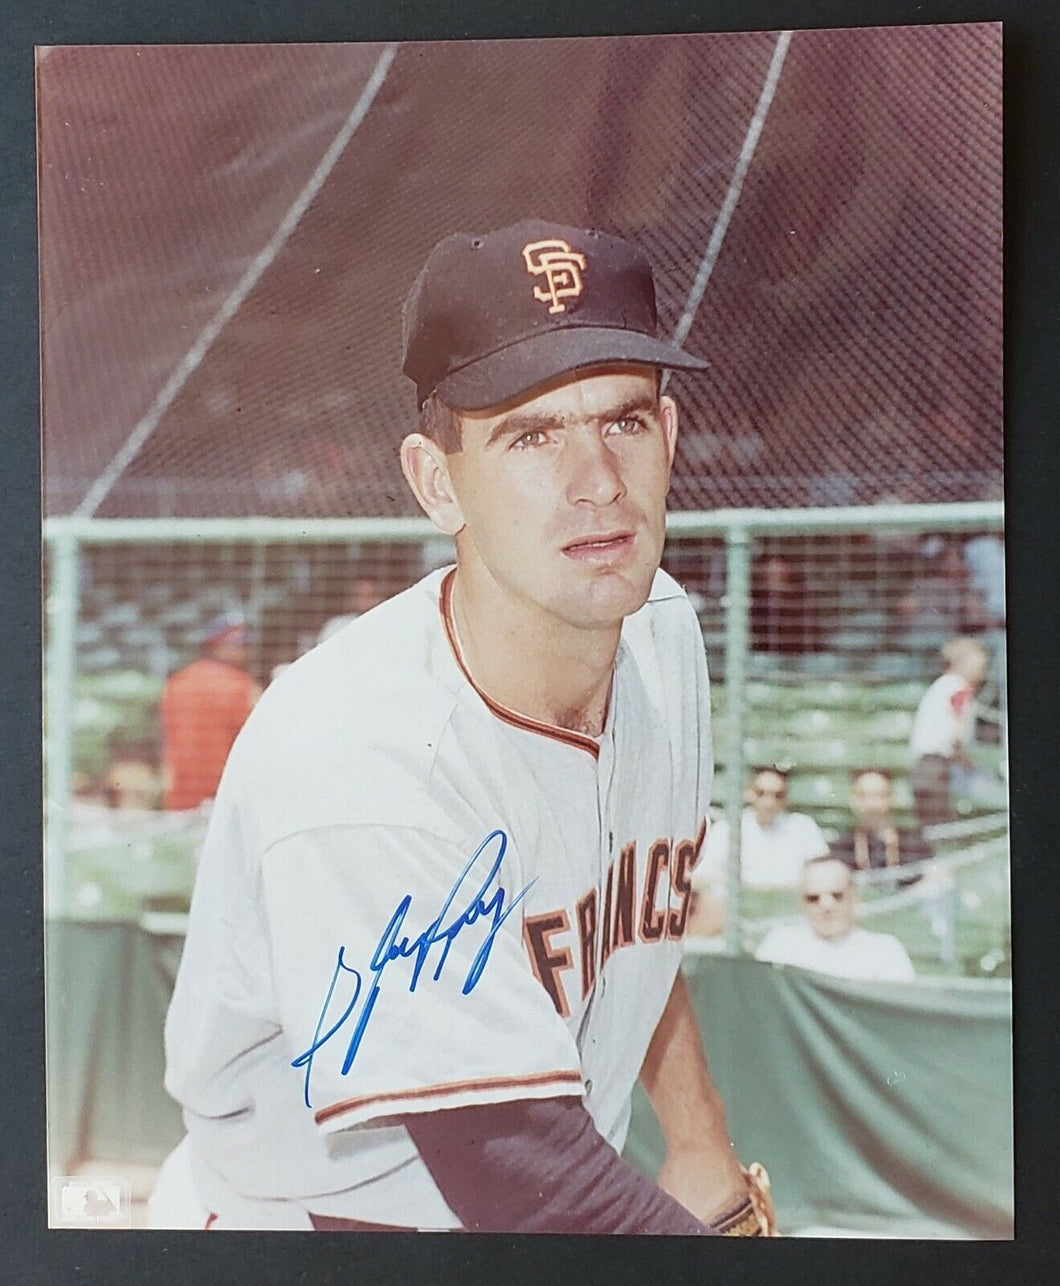 MLB San Francisco Giants Hall Of Famer Gaylord Perry Autographed Photo 8x10